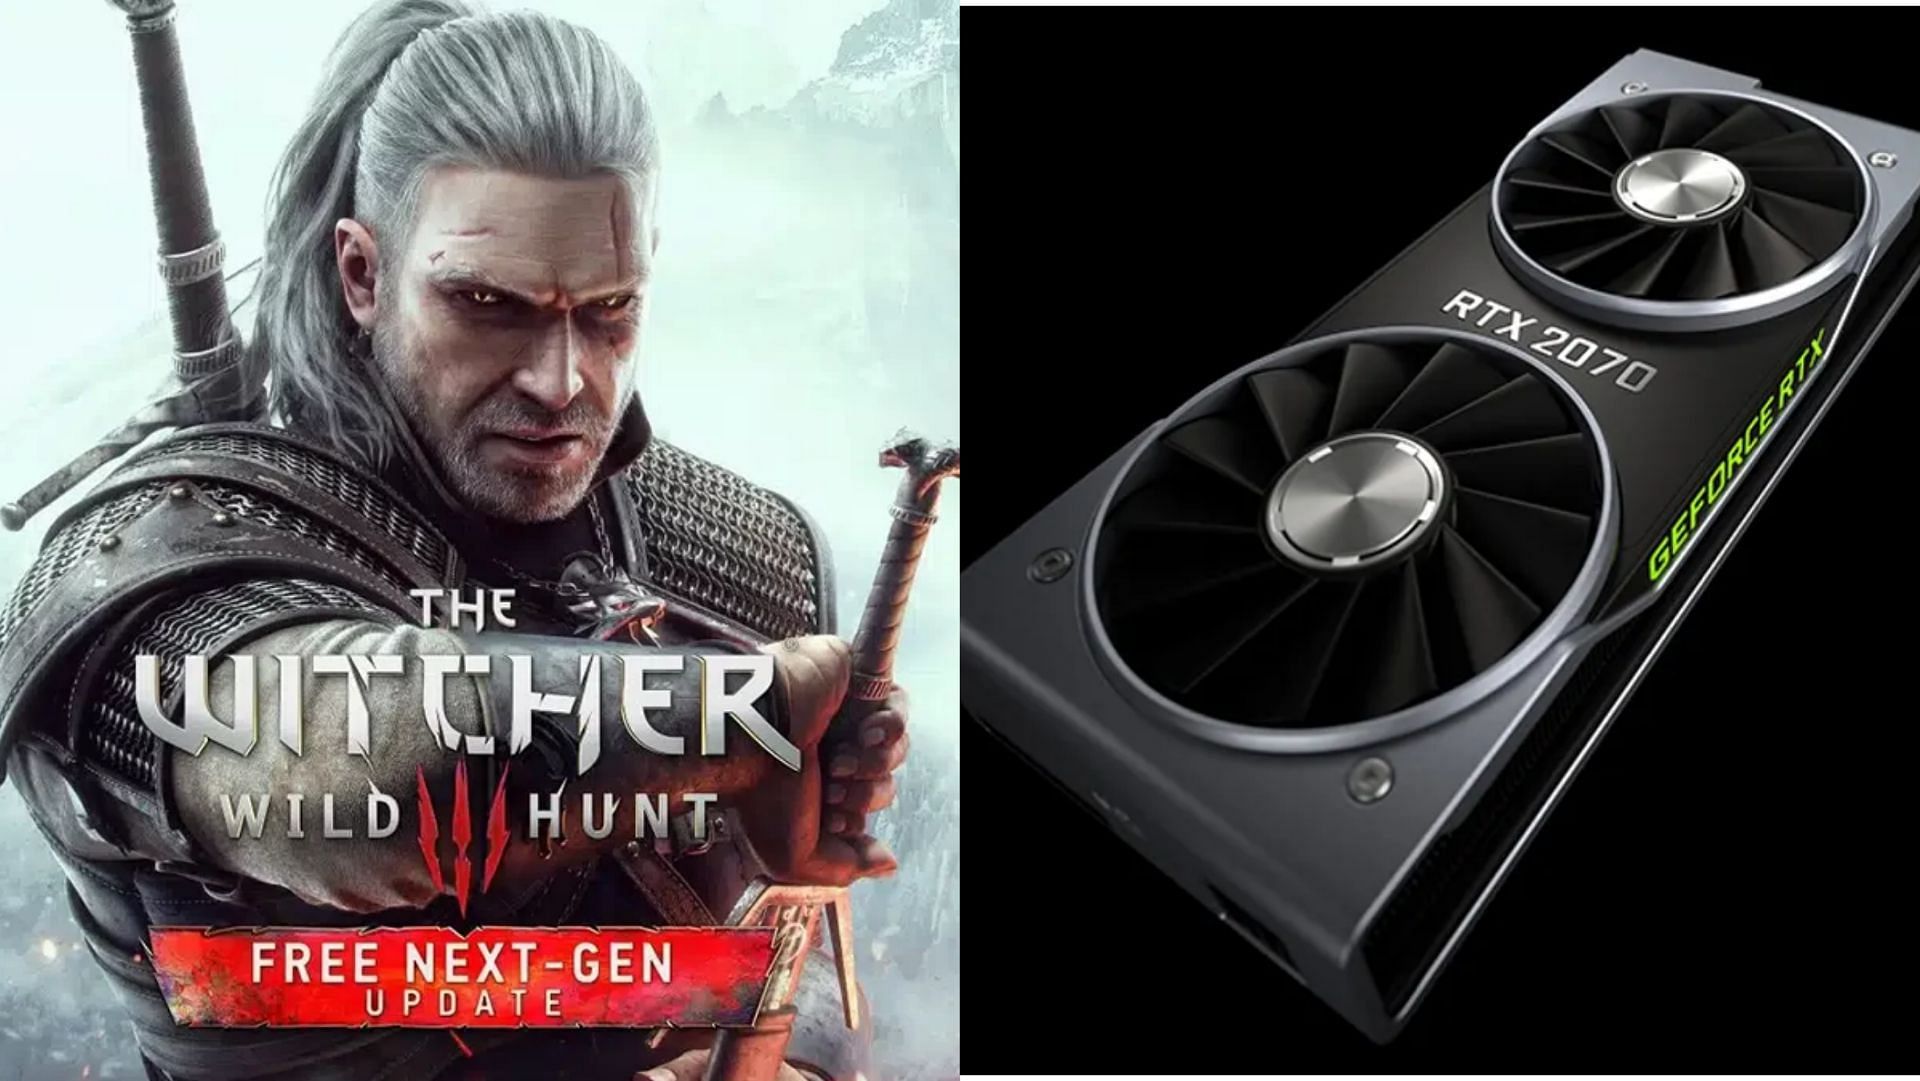 Best Witcher 3 next-gen settings for RTX 2070 (with and without